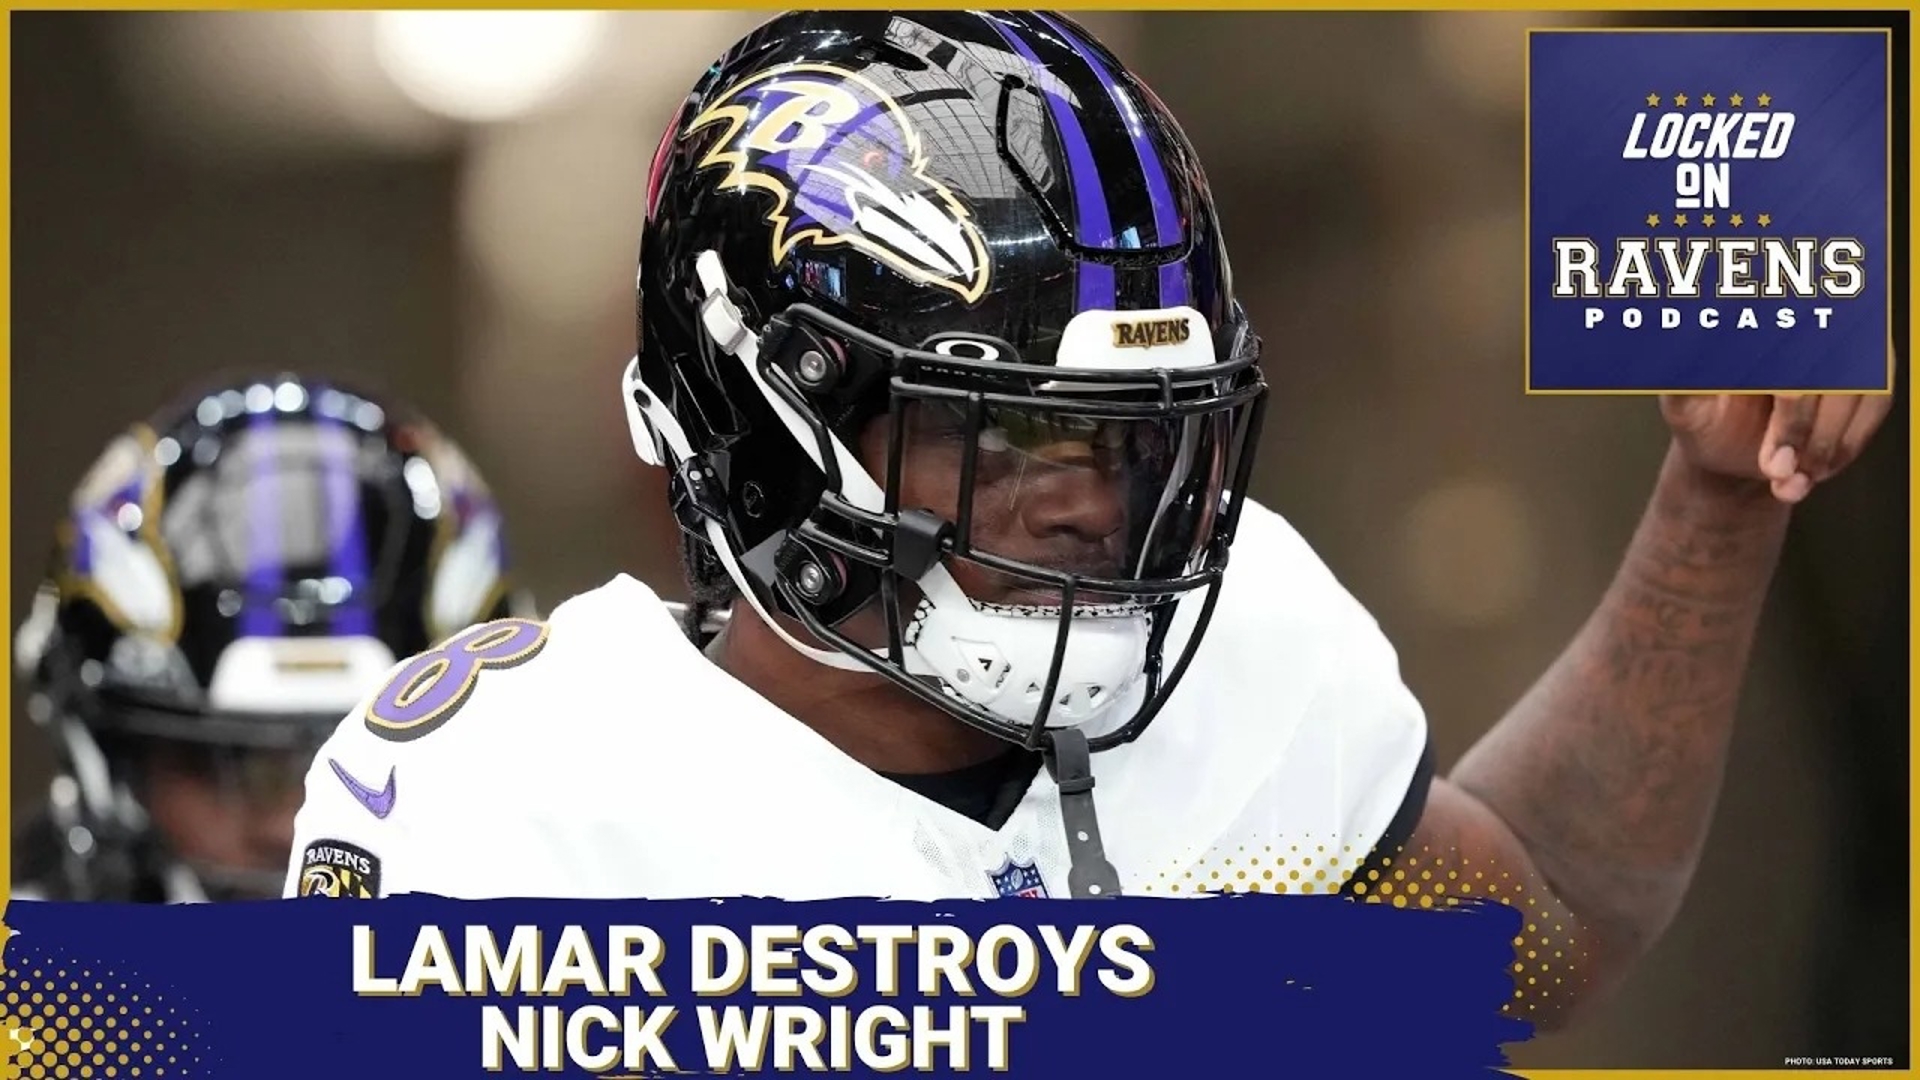 We look at how Baltimore Ravens quarterback Lamar Jackson destroyed Nick Wright following his disrespectful snub and remarks, discussing the events and more.